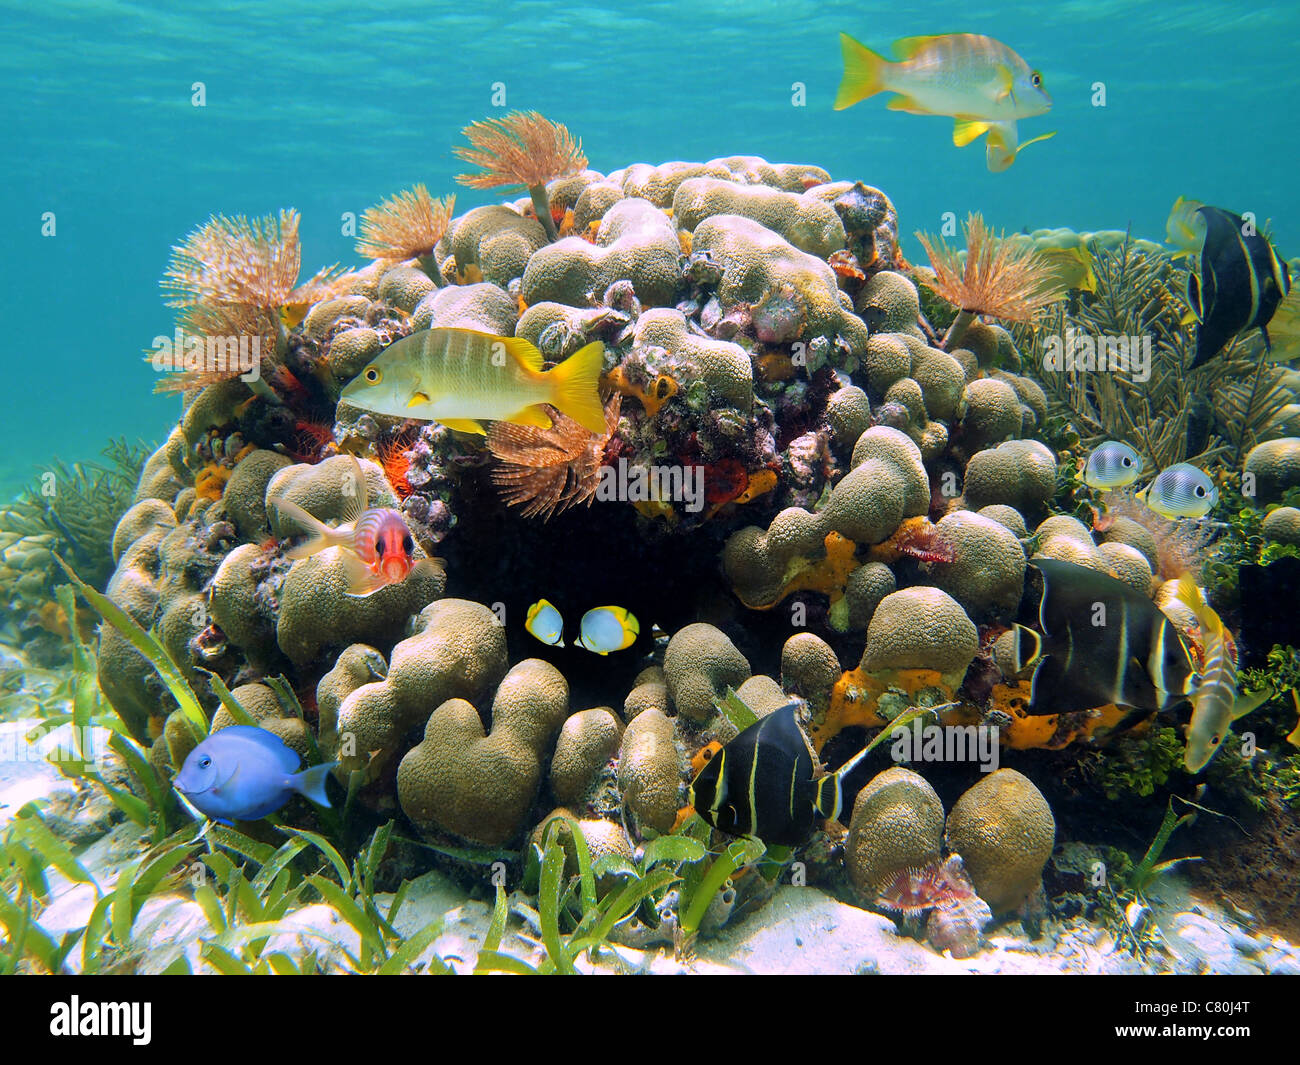 Coral reef with colorful tropical fish and sea worms, Caribbean, Costa Rica Stock Photo